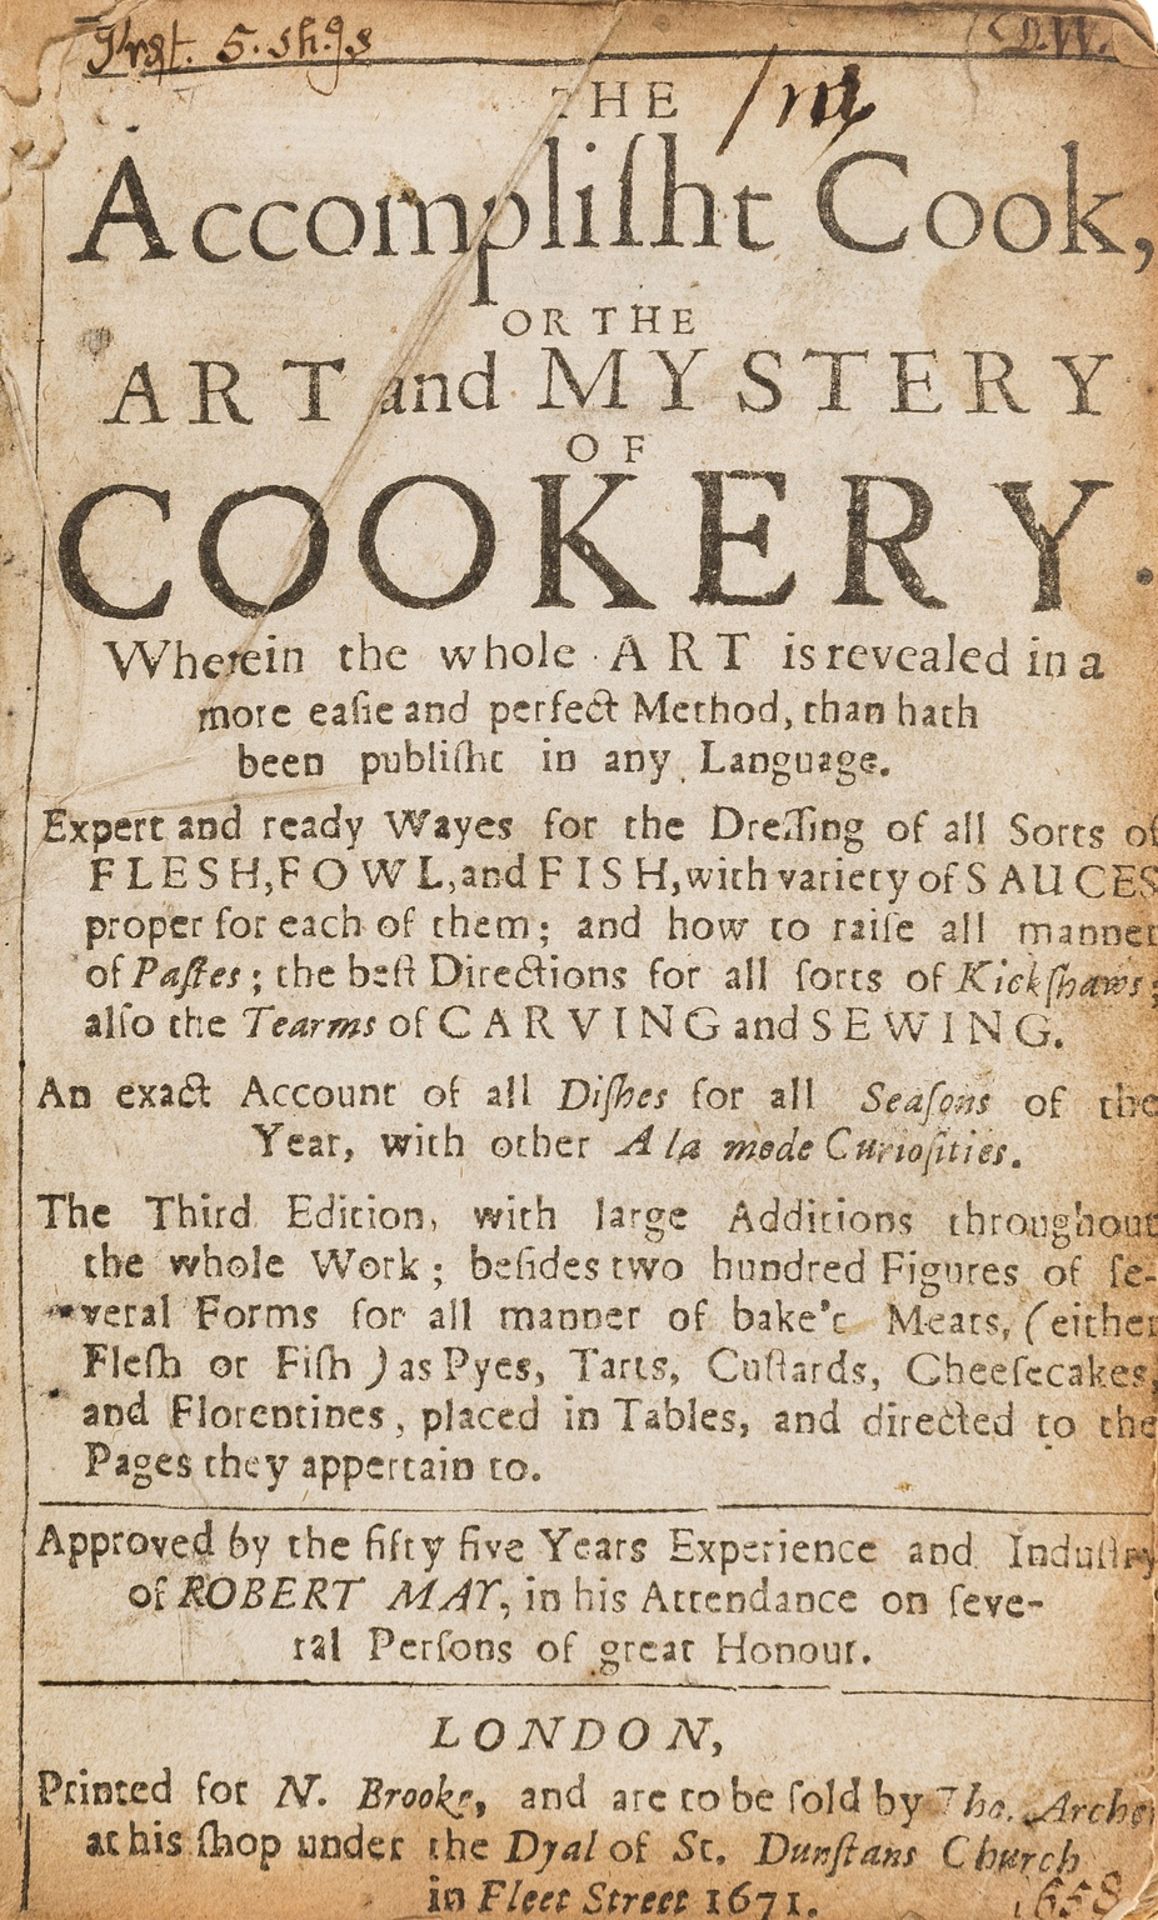 Cookery.- May (Robert) The Accomplisht Cook, or the Art and Mystery of Cookery, third edition, 1671.